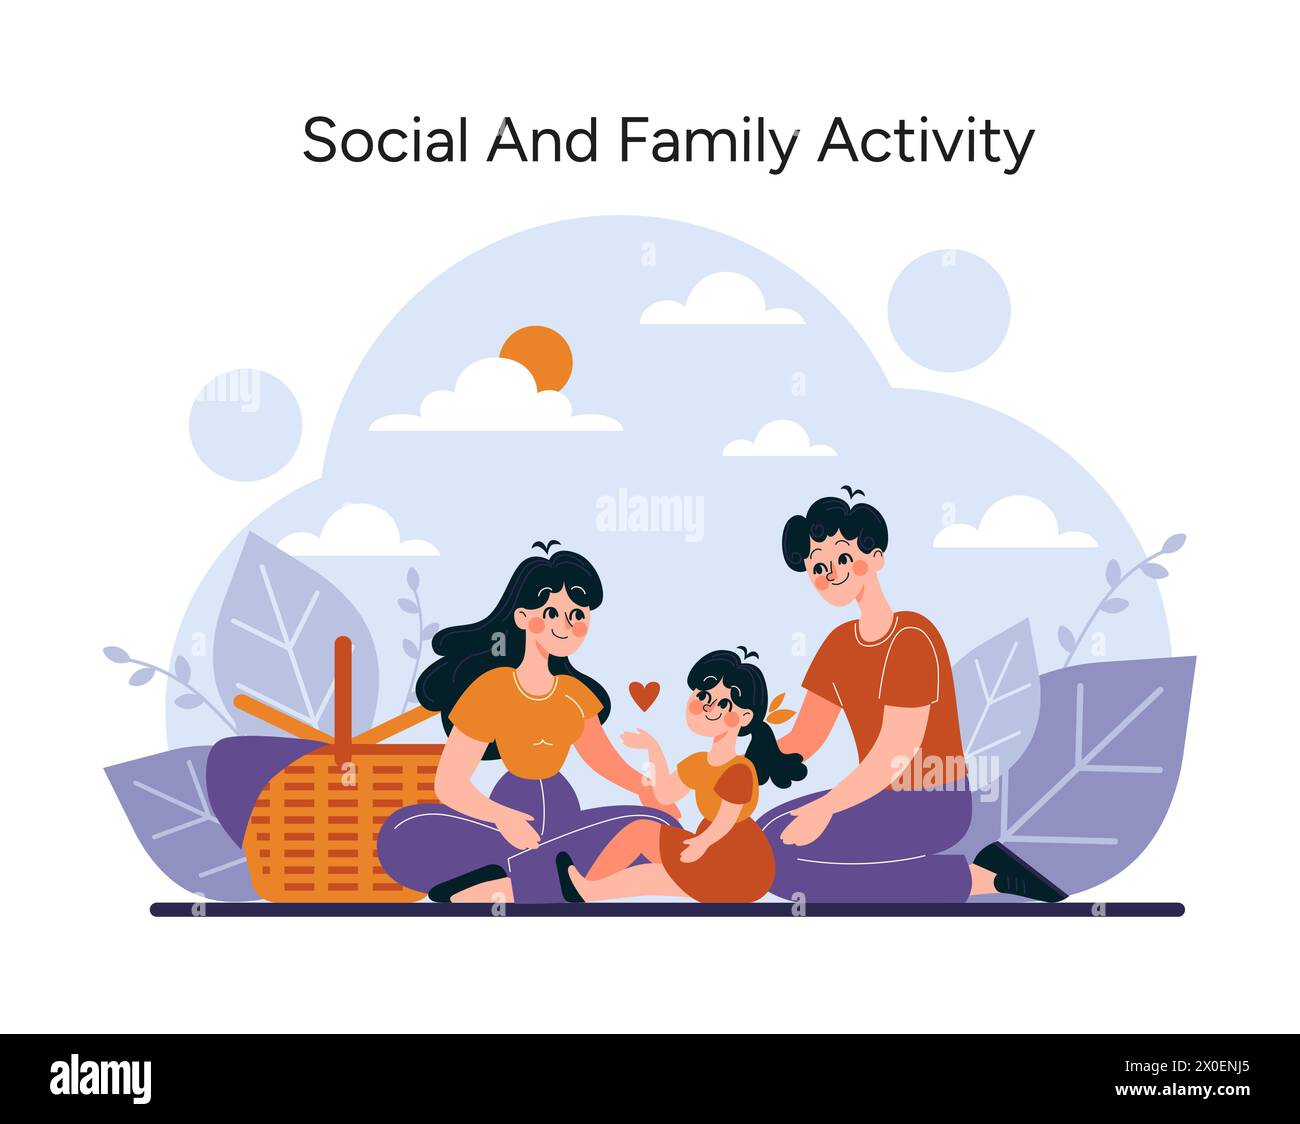 Family picnic set. A heartwarming illustration of quality time, with a parent and children enjoying nature and each other's company. Vector illustration Stock Vector